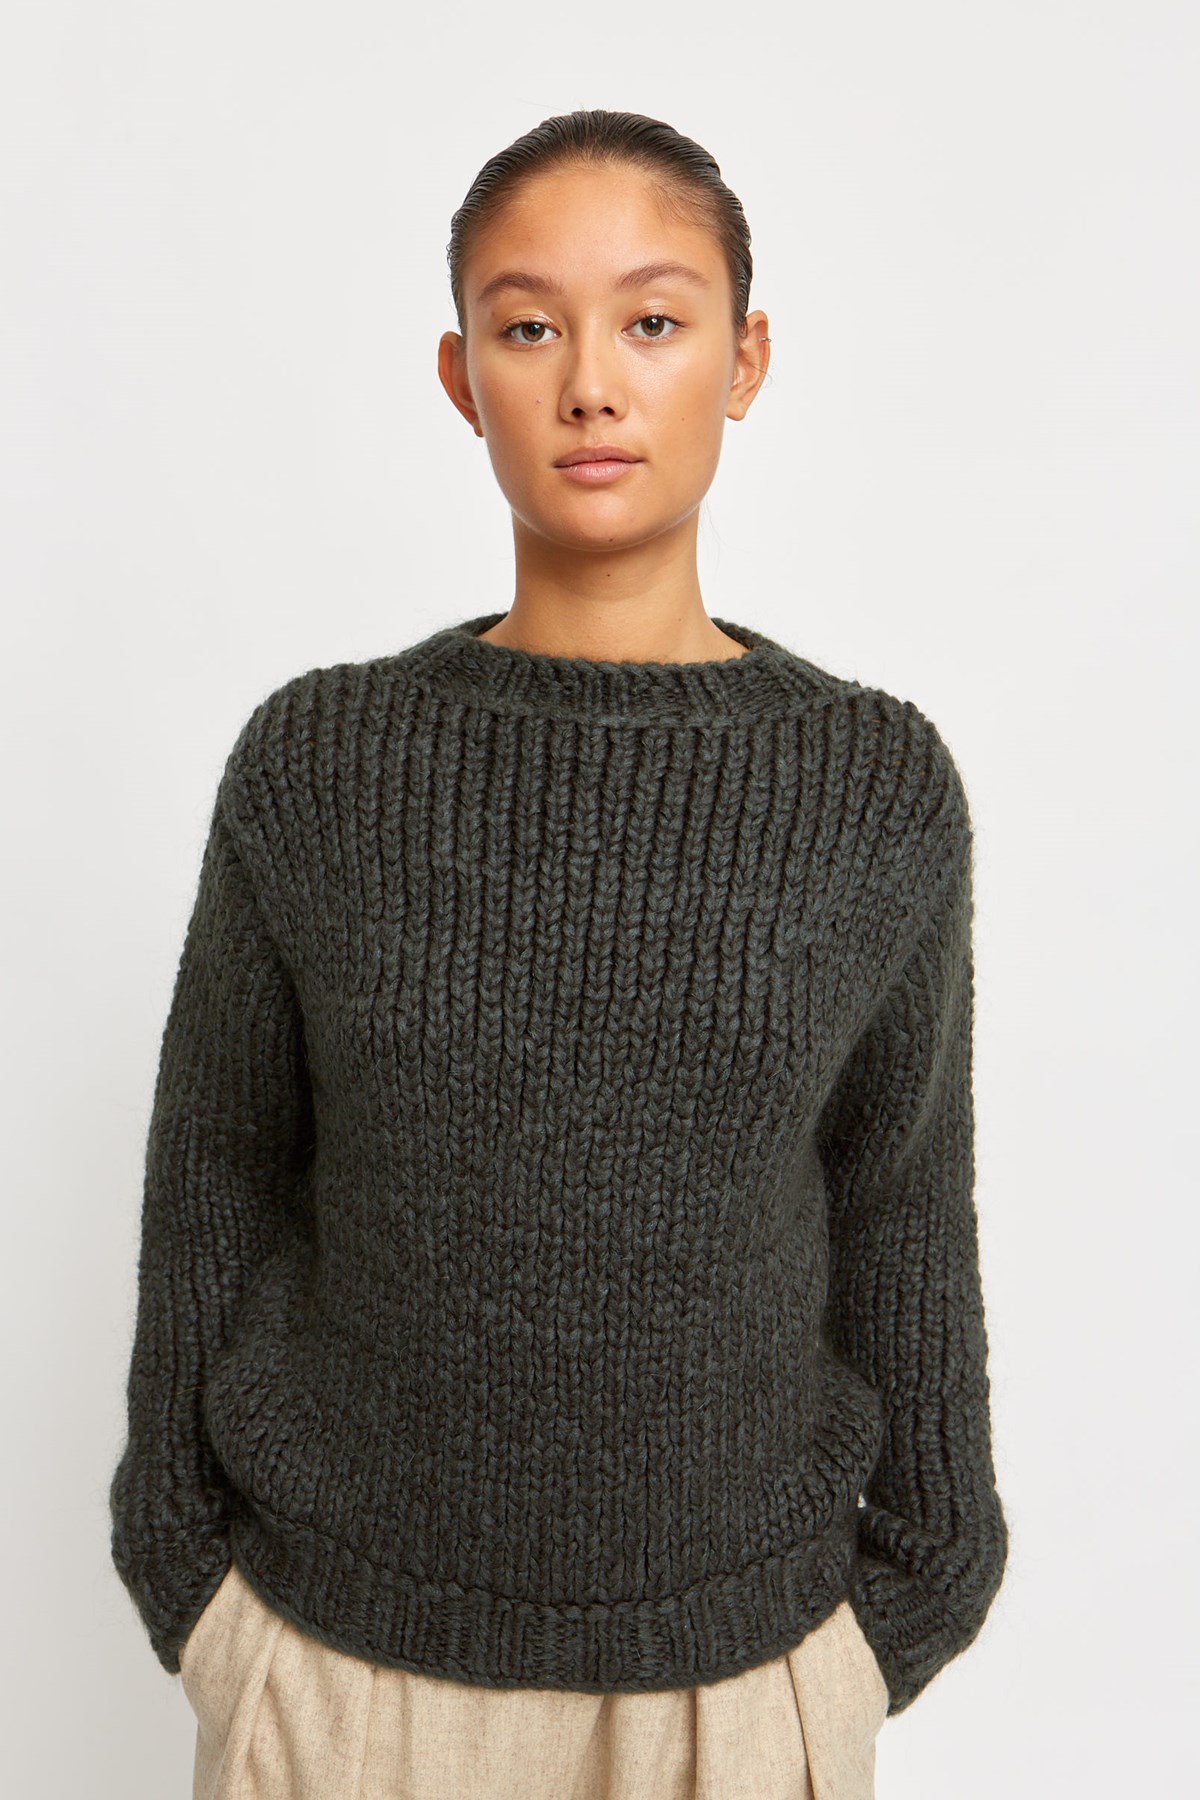 Download Wood Wood - Mock Neck Ripped Sweater